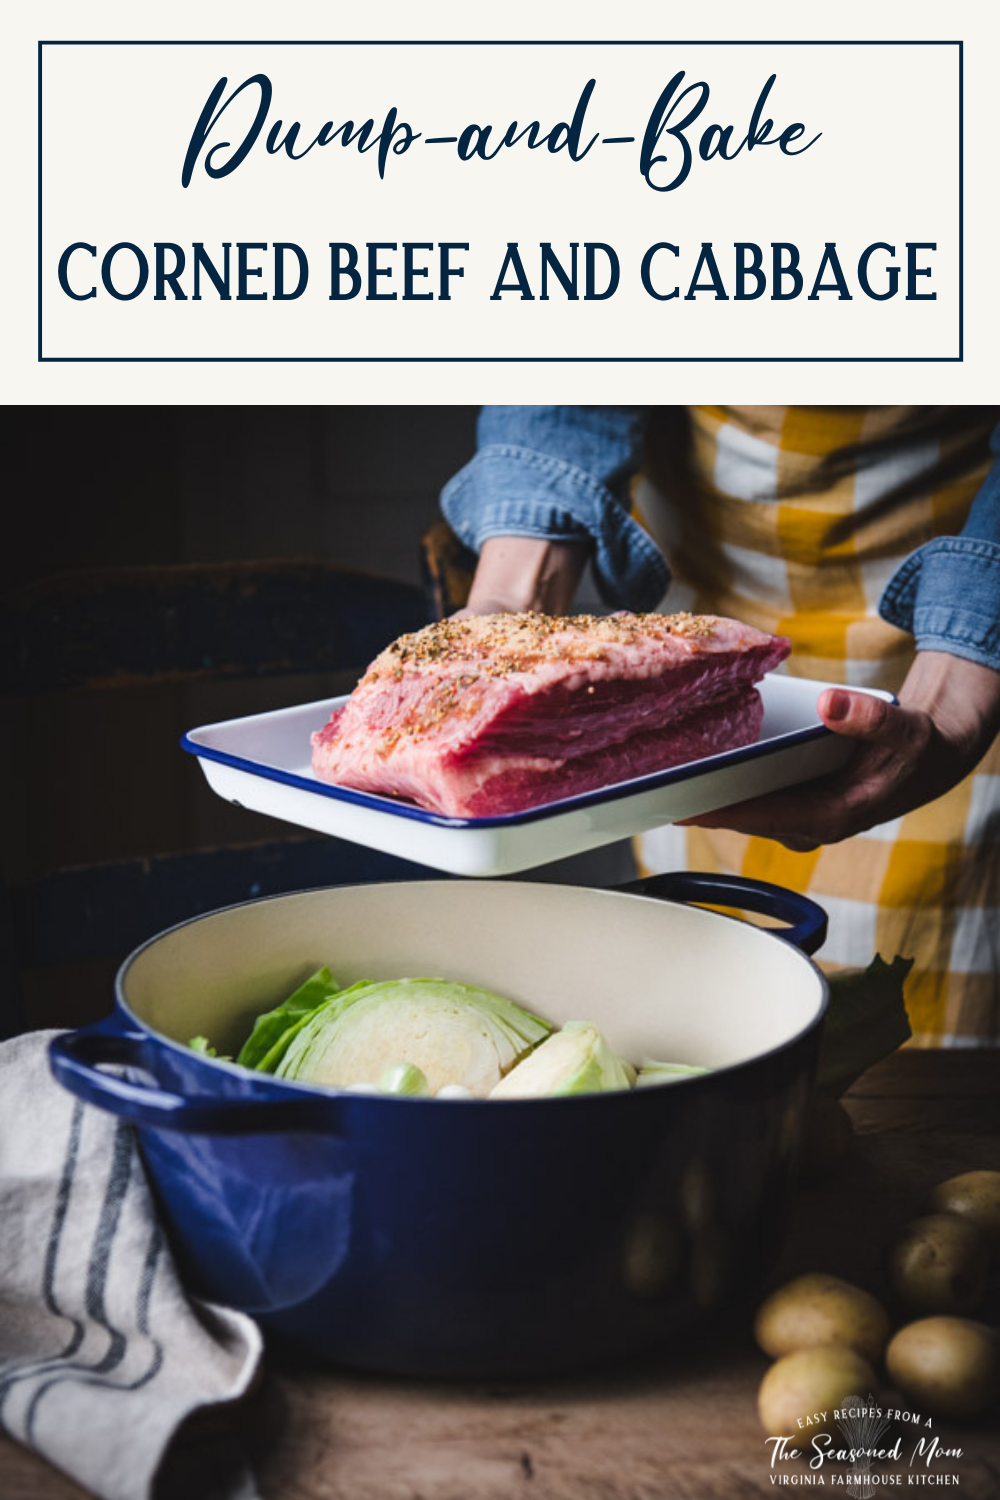 Process shot showing how to make corned beef and cabbage with text title box at top.